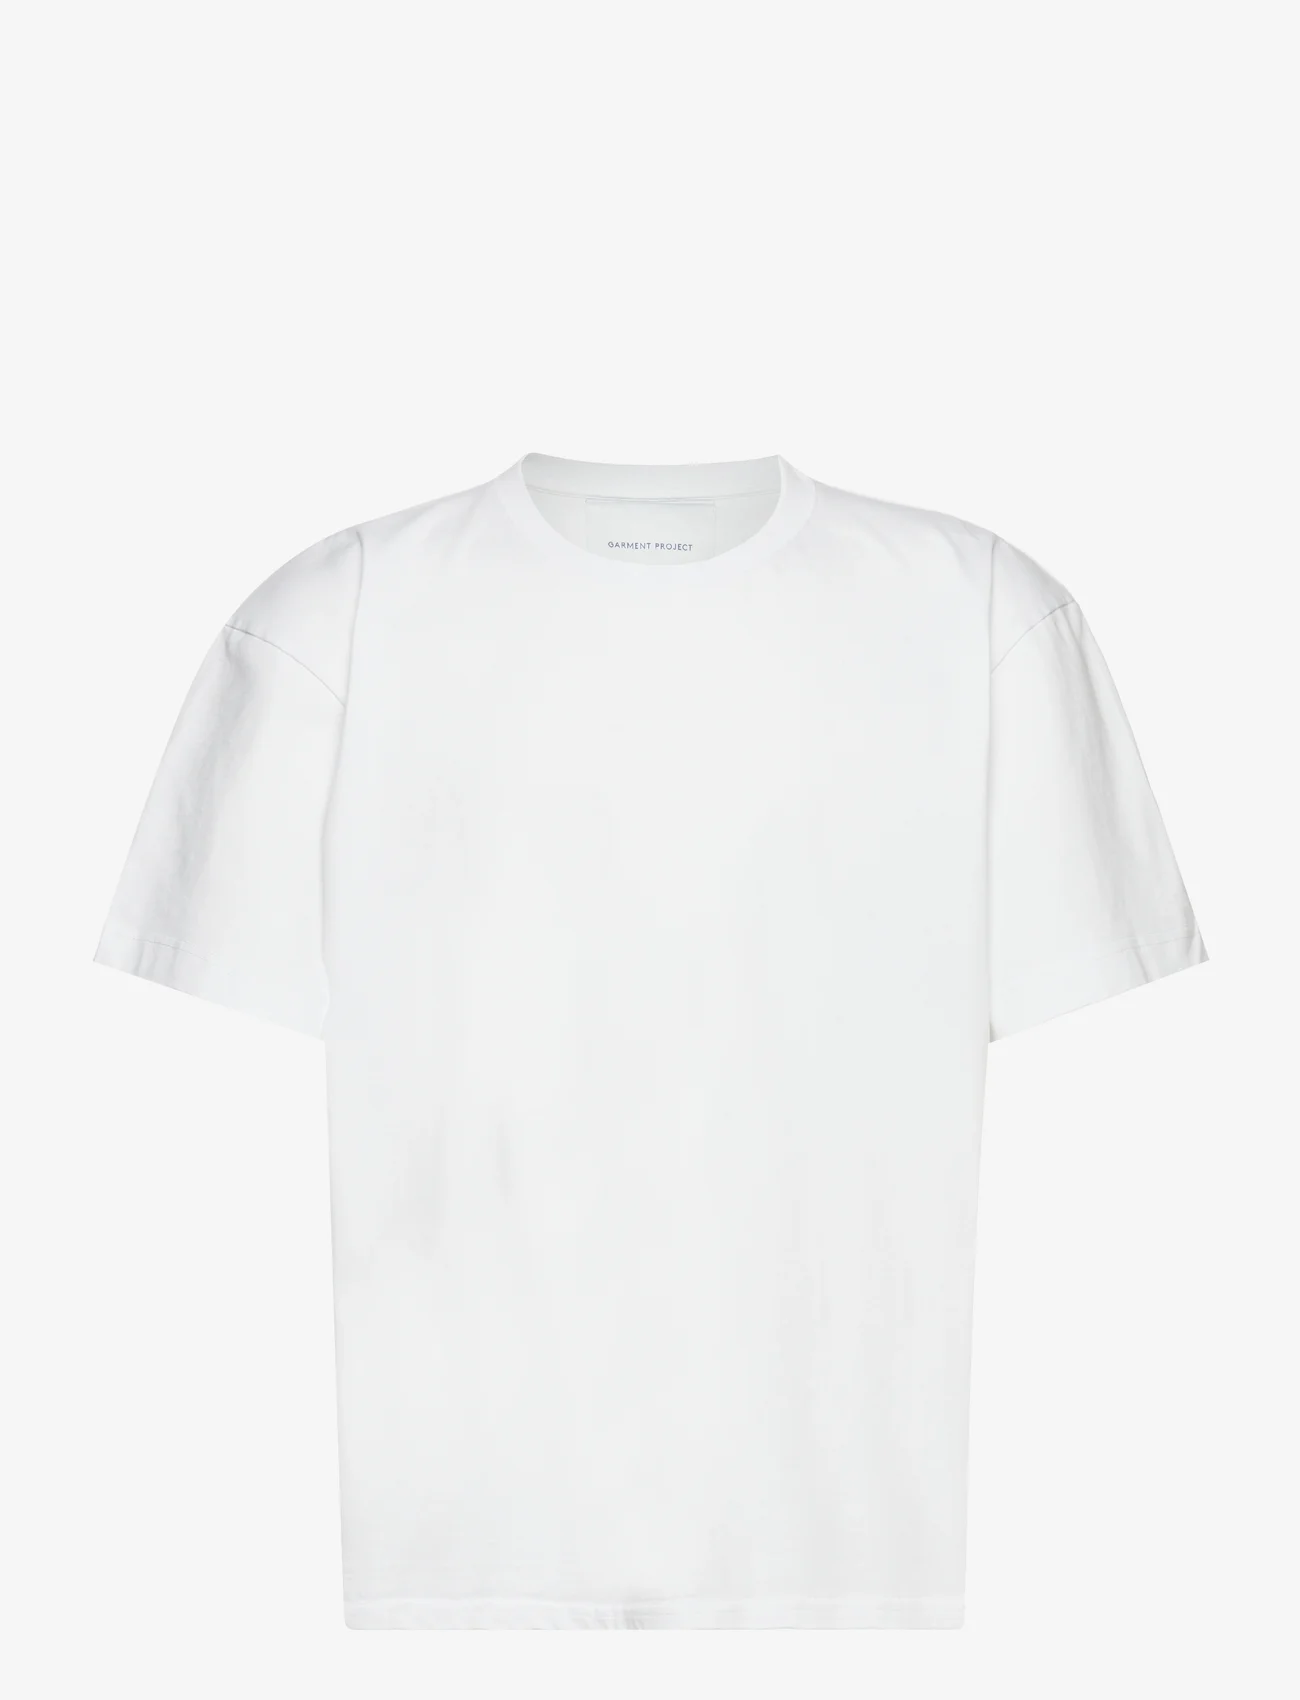 Garment Project - GP Heavy Tee - White - nordic style - 100 white - 0